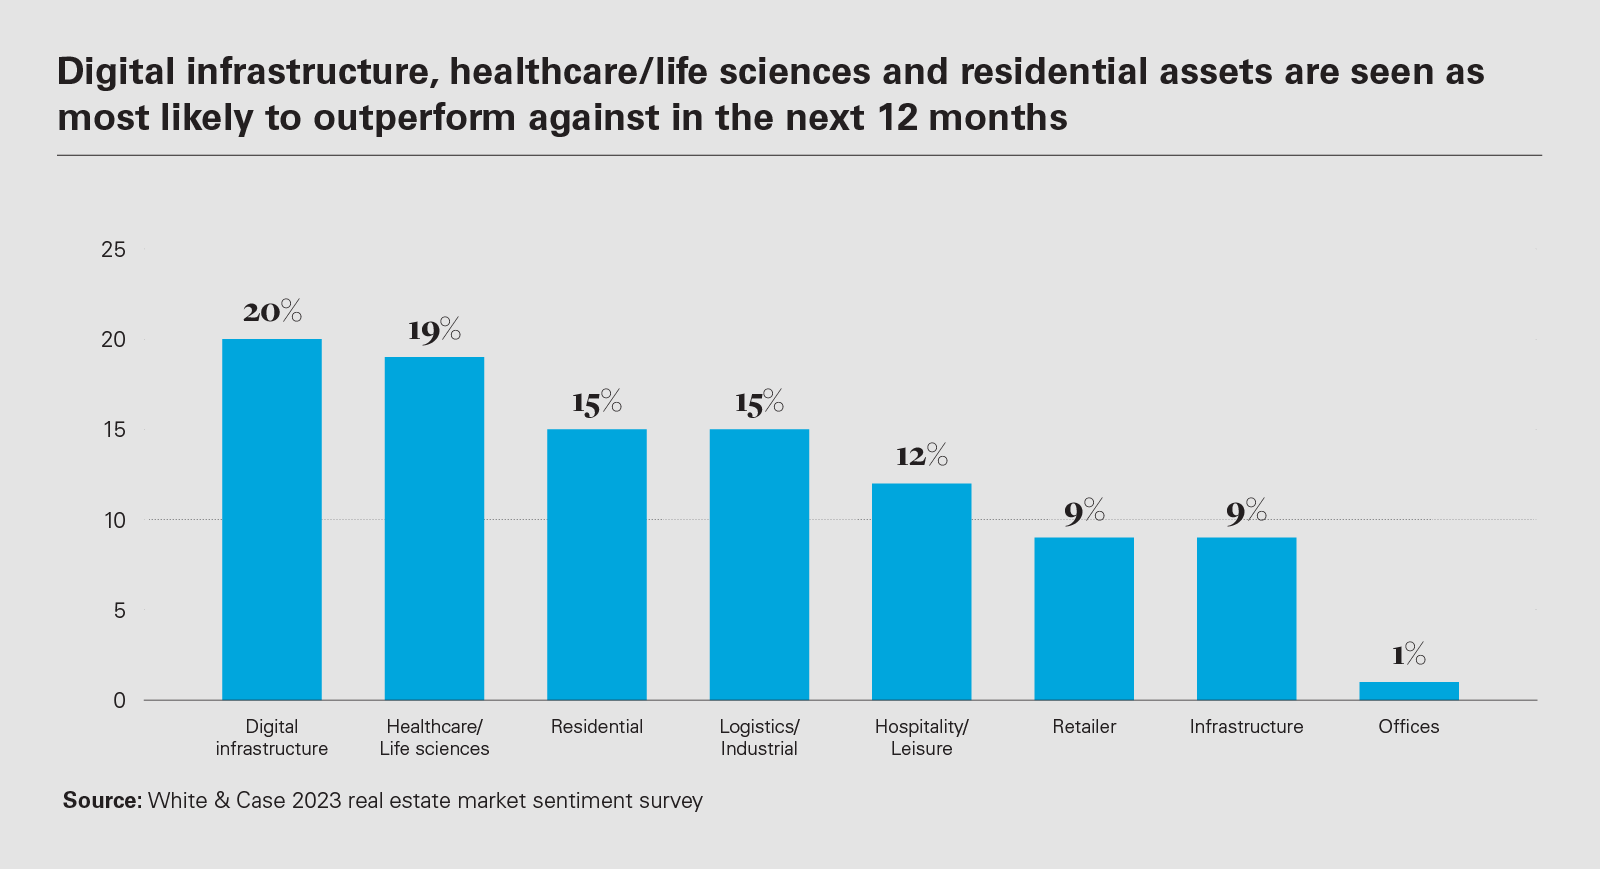 Digital infrastructure, healthcare/life sciences and residential assets are seen as most likely to outperform against in the next 12 months